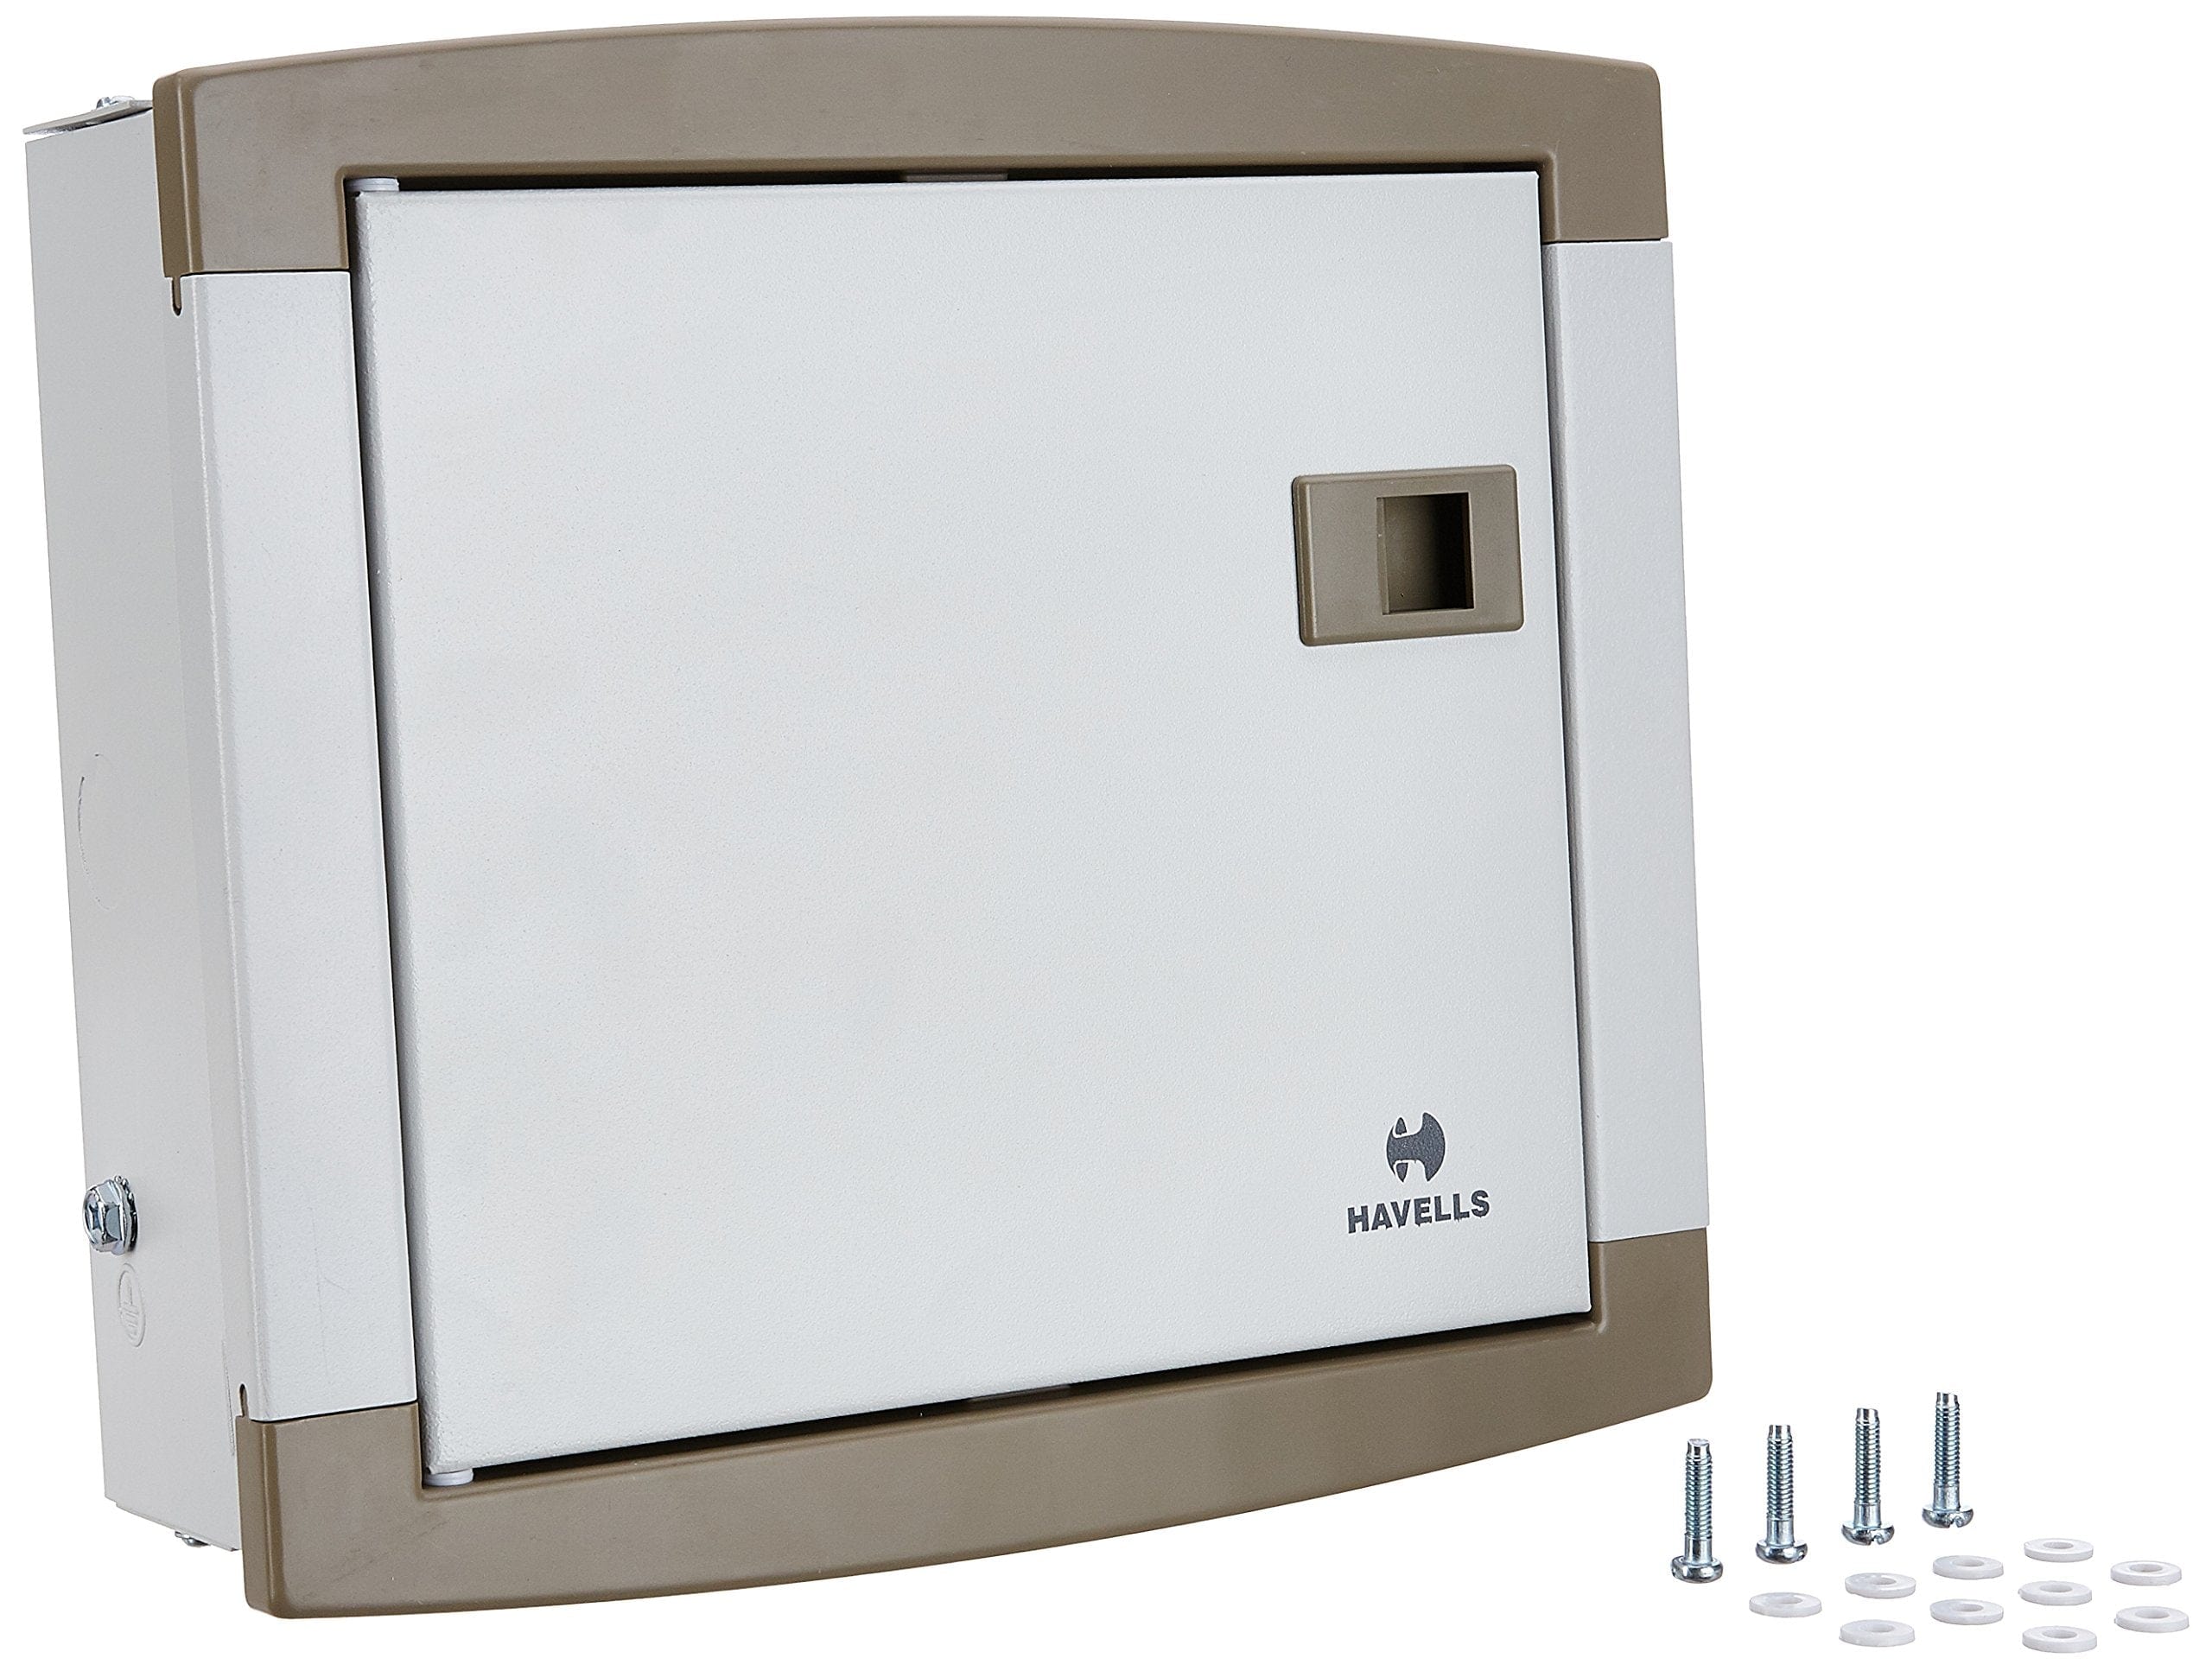 Havells Single Phase Distribution Board | Supply Master Accra, Ghana Electrical Accessories Buy Tools hardware Building materials